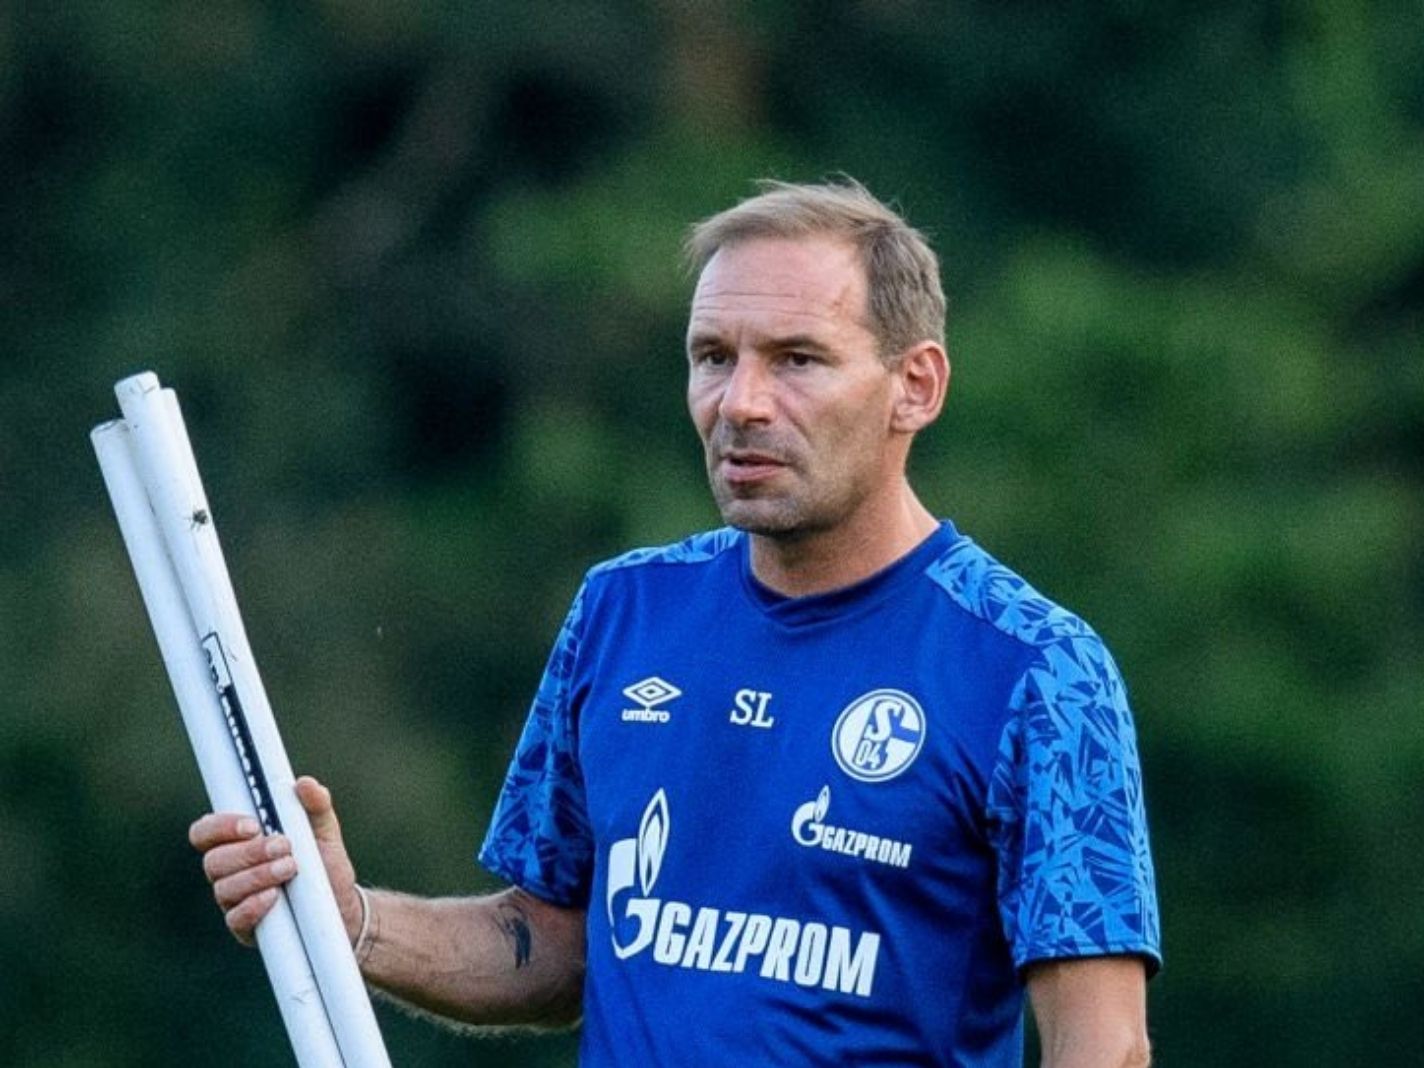 New Man United therapist Sascha Lense has a connection to Chelsea